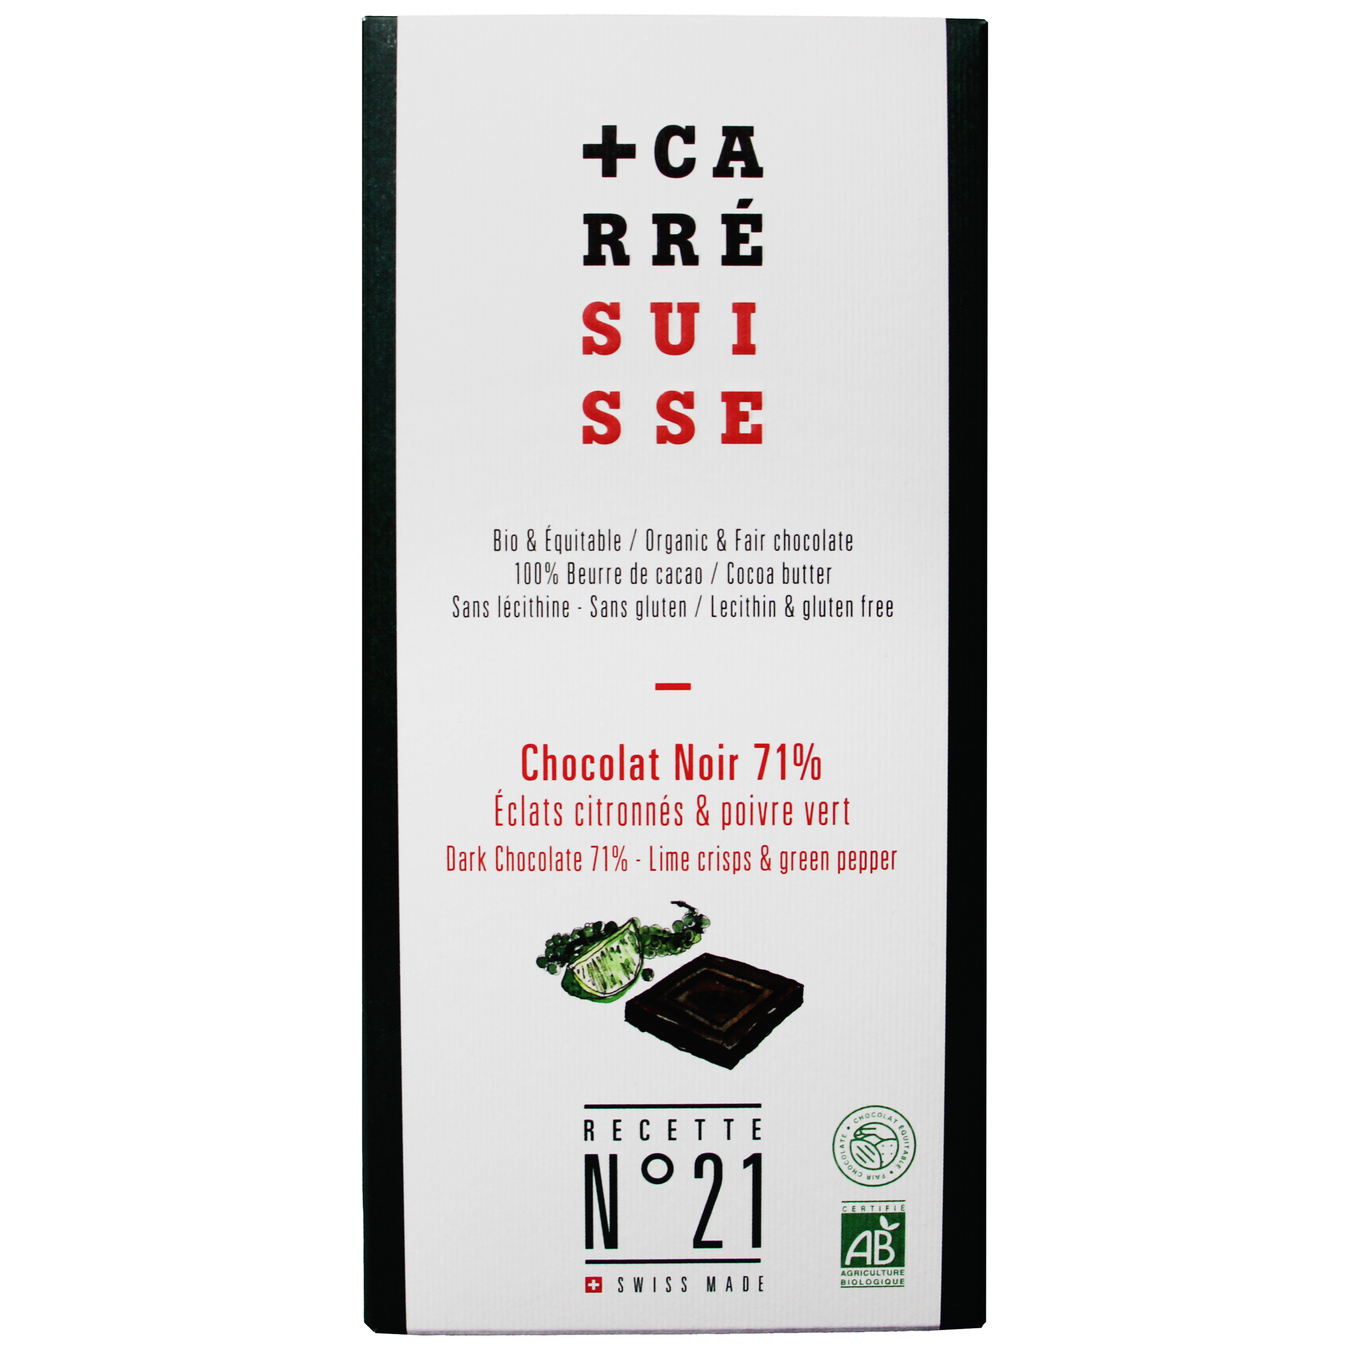 Extra-Dark Chocolate Carre Suisse With Lime Chips And Green Pepper 100g